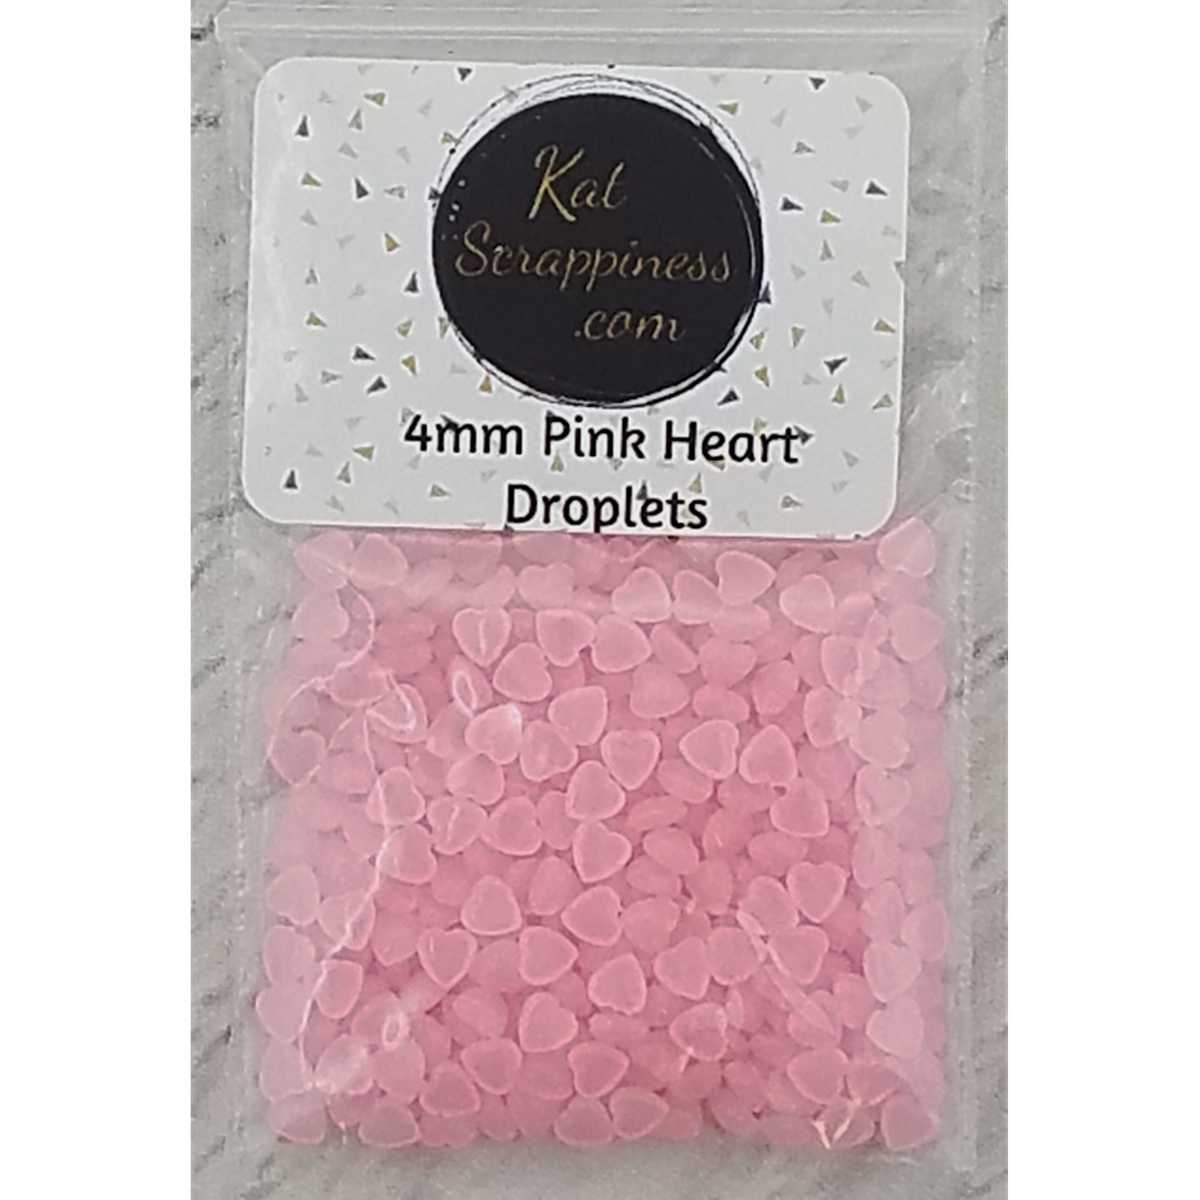 4mm Pink Heart Droplets - Kat Scrappiness